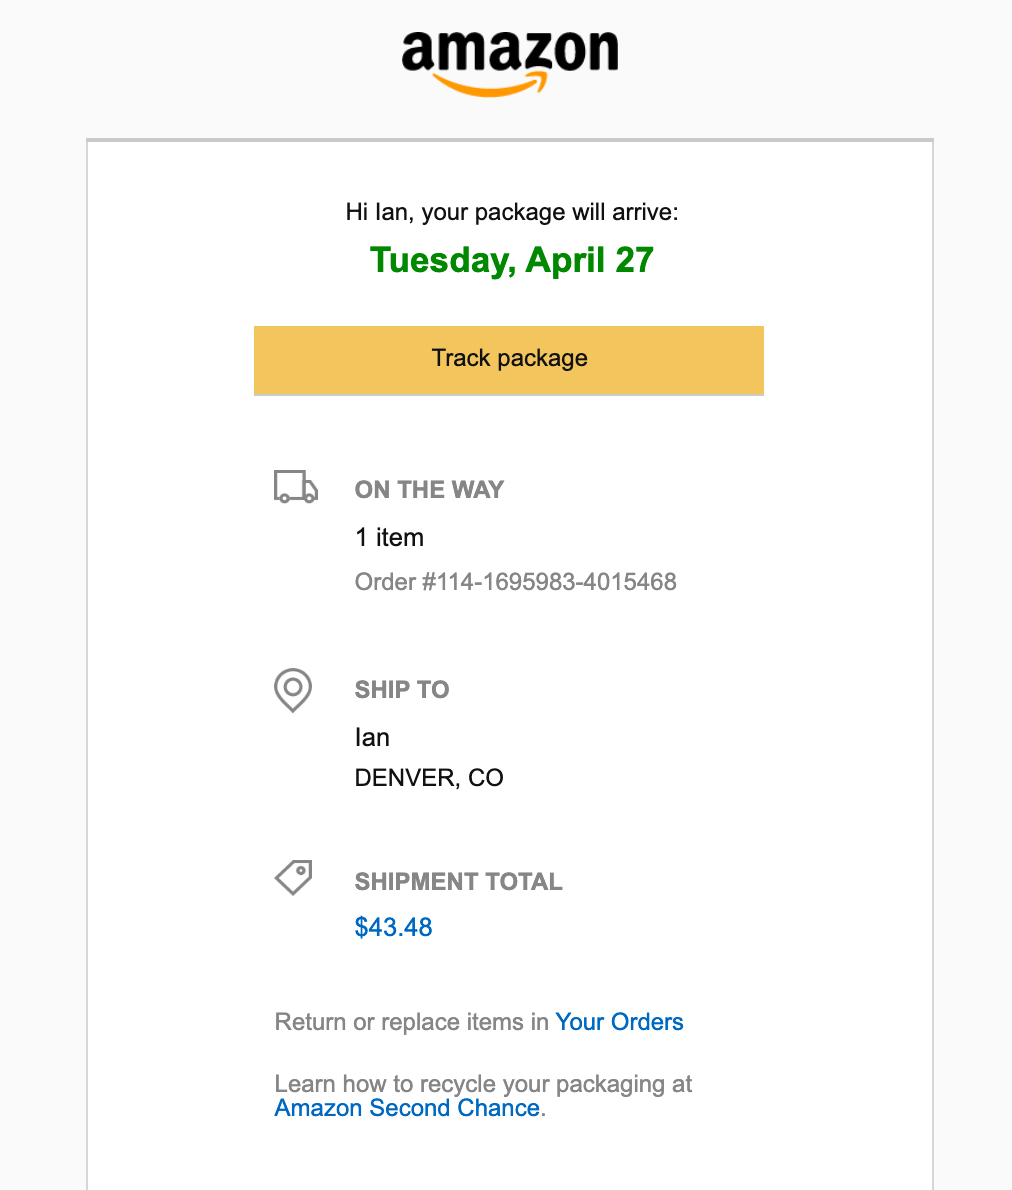 Amazon Display Delivery Details